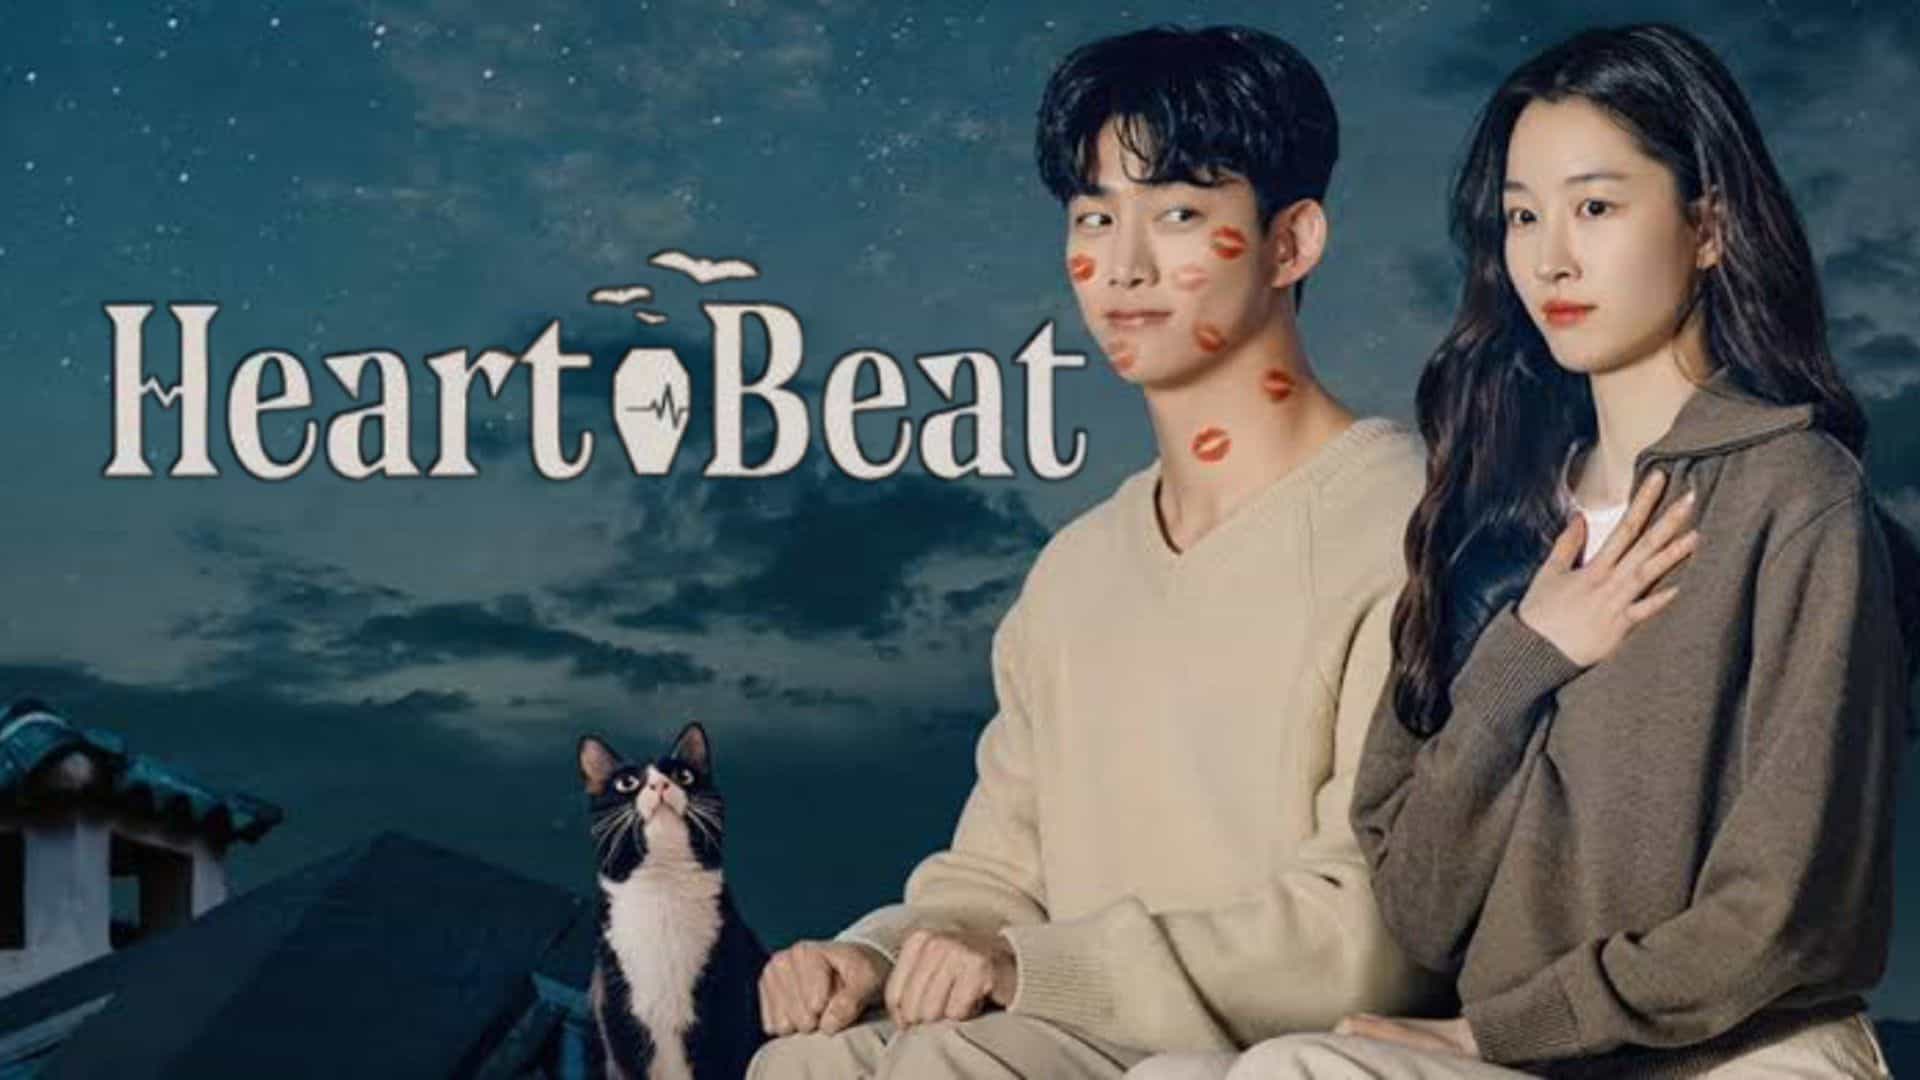 my heart is beating episode 6 release date